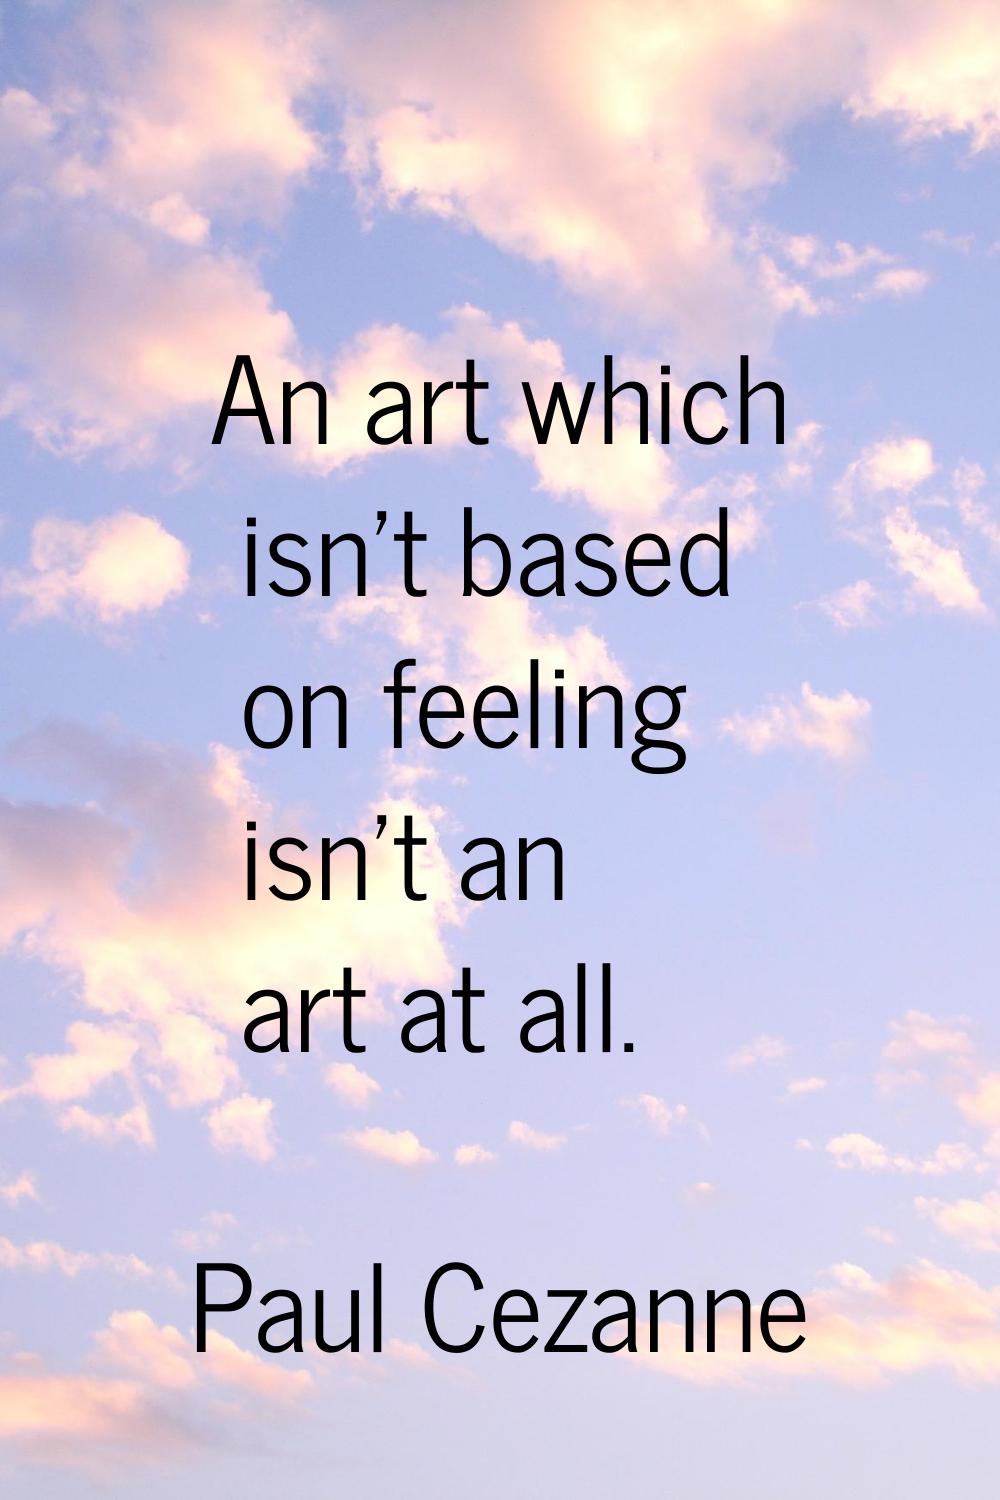 An art which isn't based on feeling isn't an art at all.